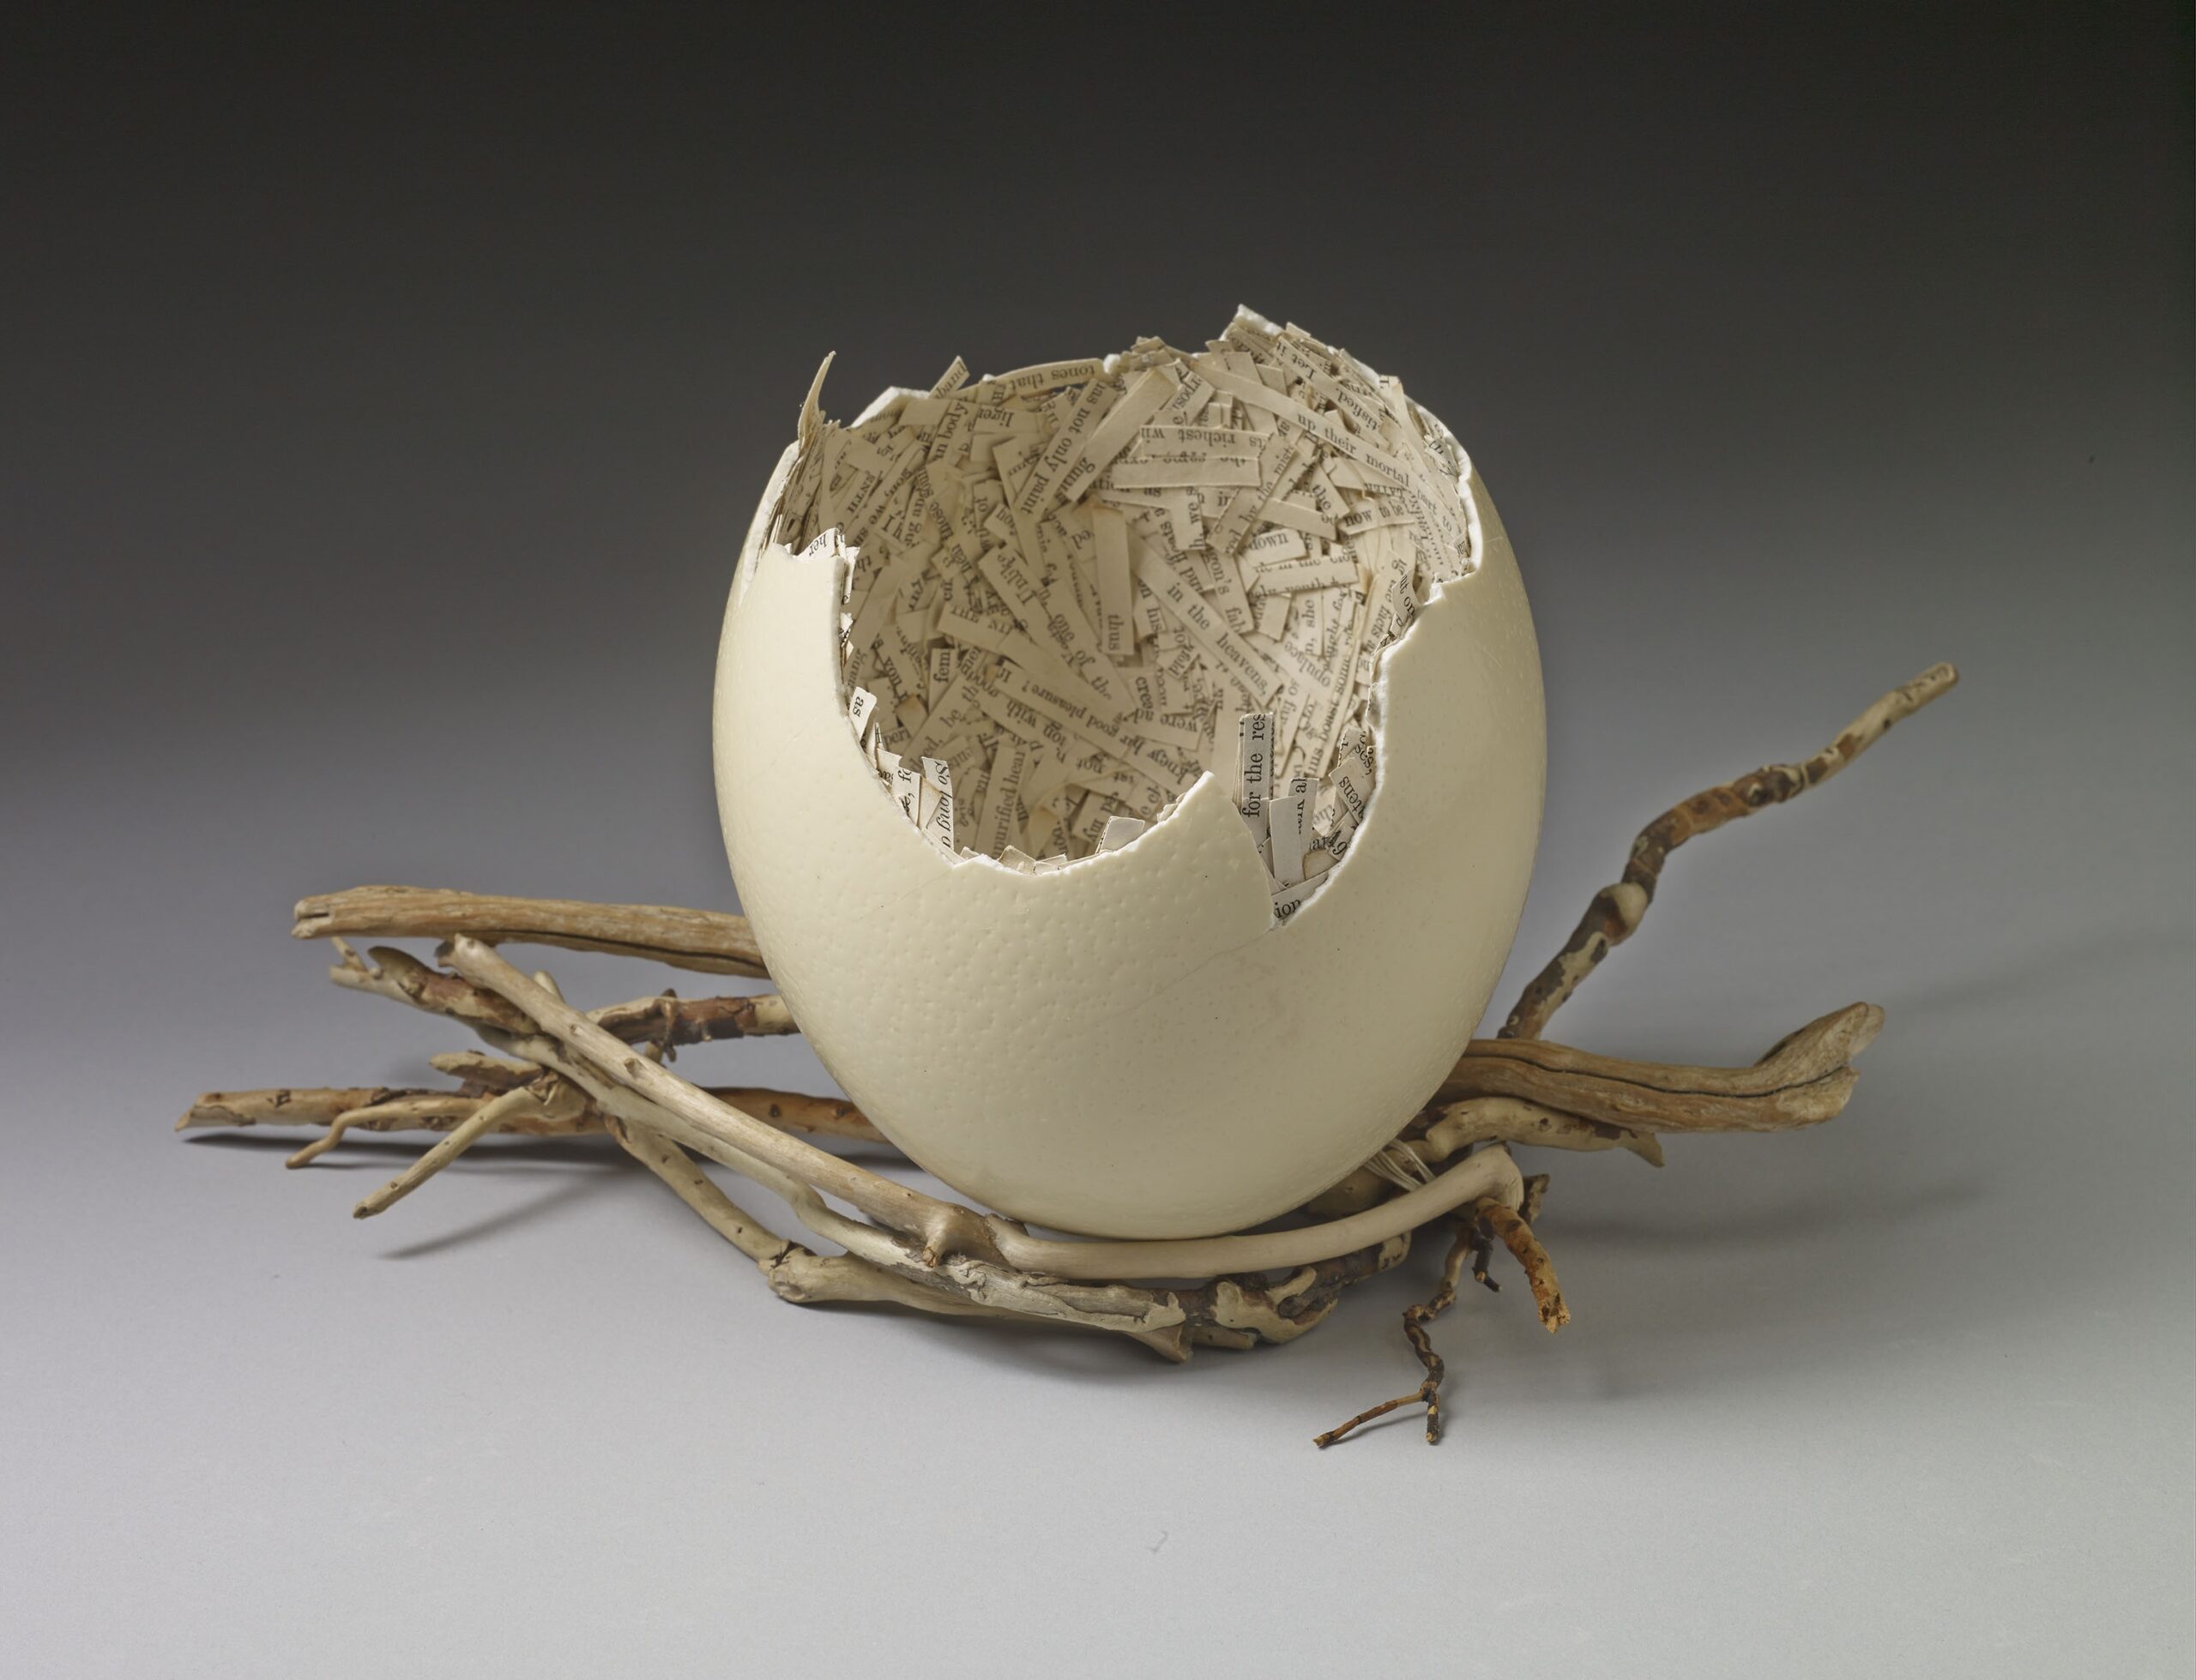 OVUM II, ostrich egg, twigs, paper: pages by Margaret Fuller dated 1855, 5.75 x 10.5 x 8.5in, 2016.